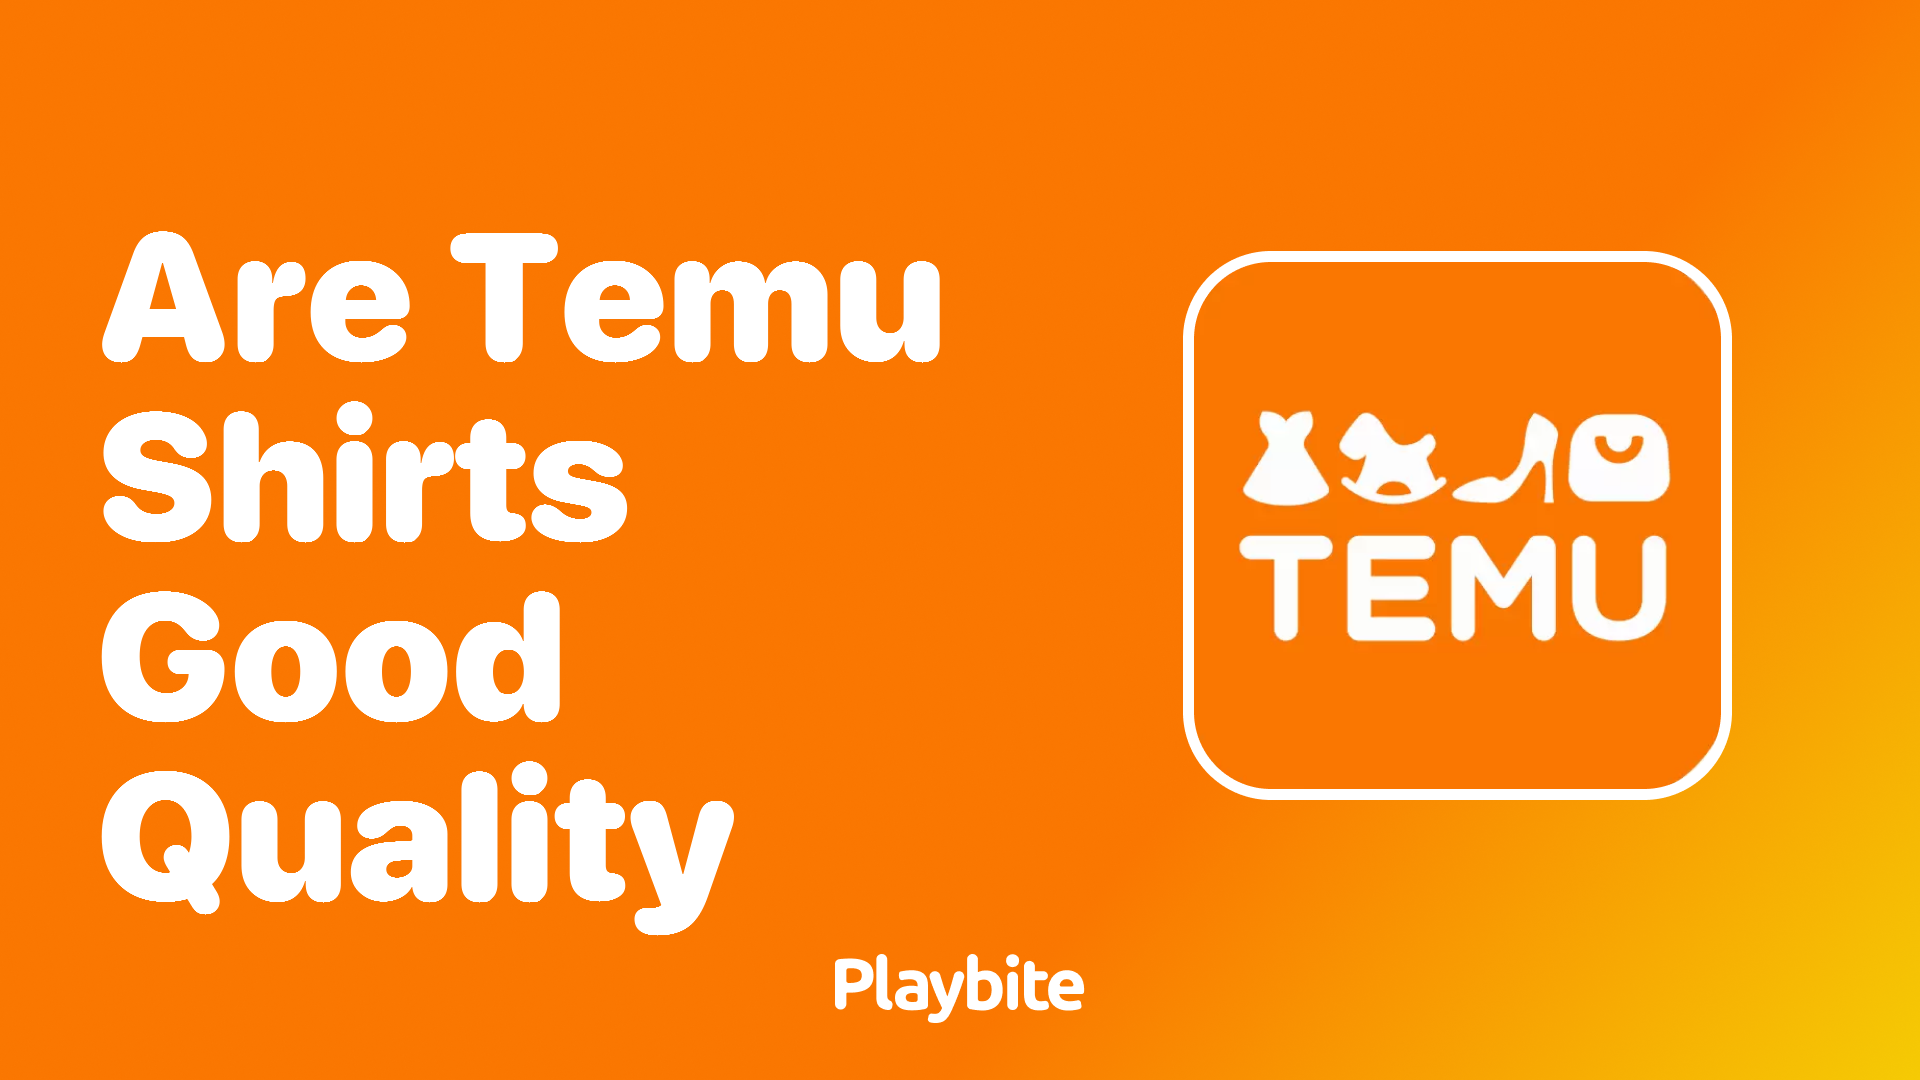 Are Temu Shirts Good Quality? Let's Find Out! - Playbite